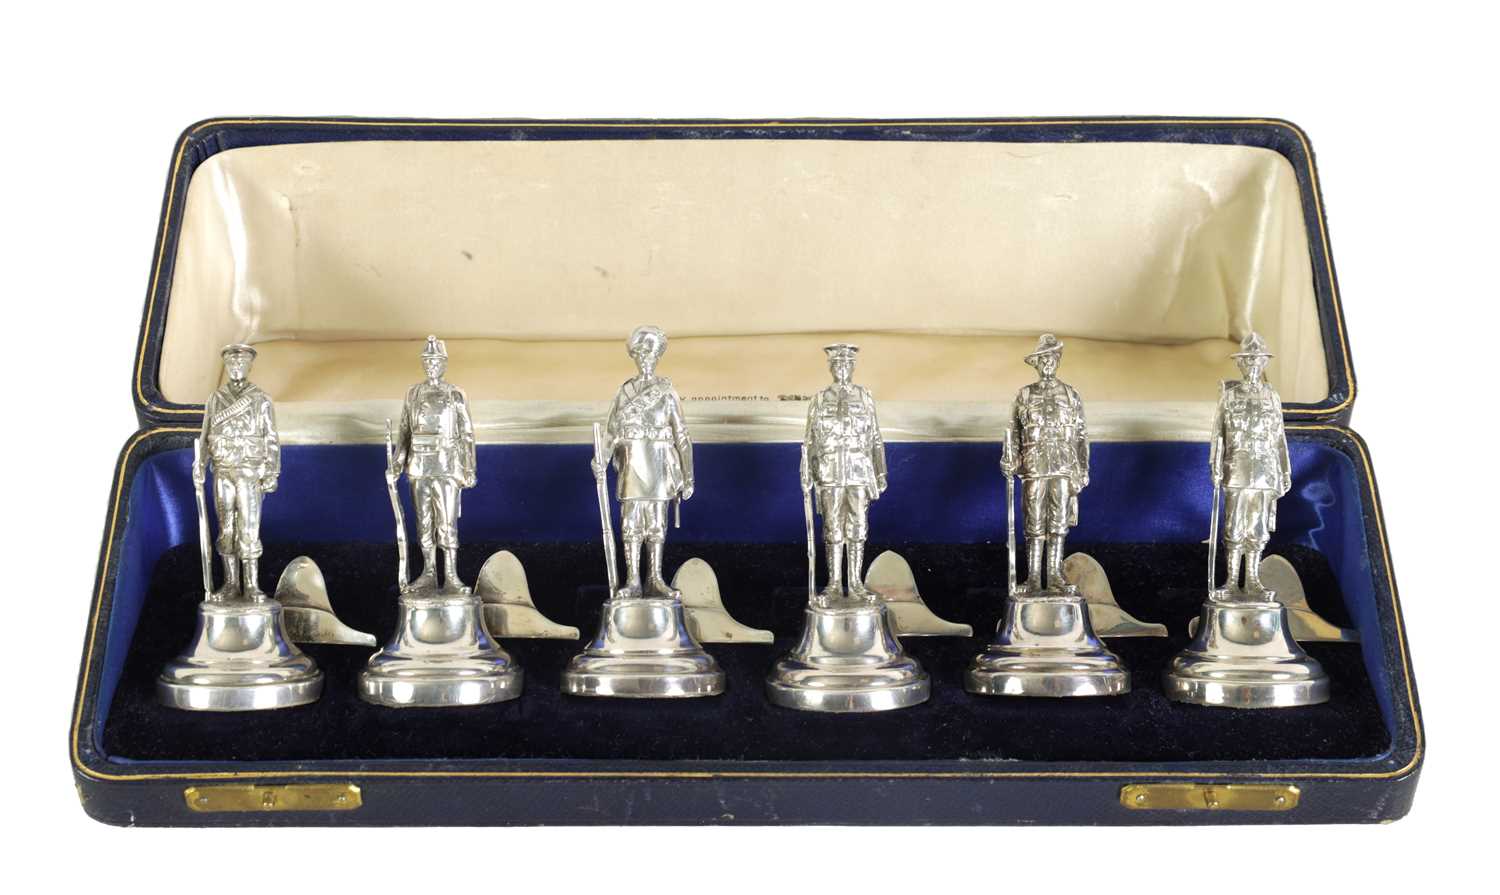 A LARGE AND RARE CASED COMPLETE SET OF SIX SILVER 'SOLDIERS OF THE EMPIRE' FIGURAL MENU HOLDERS